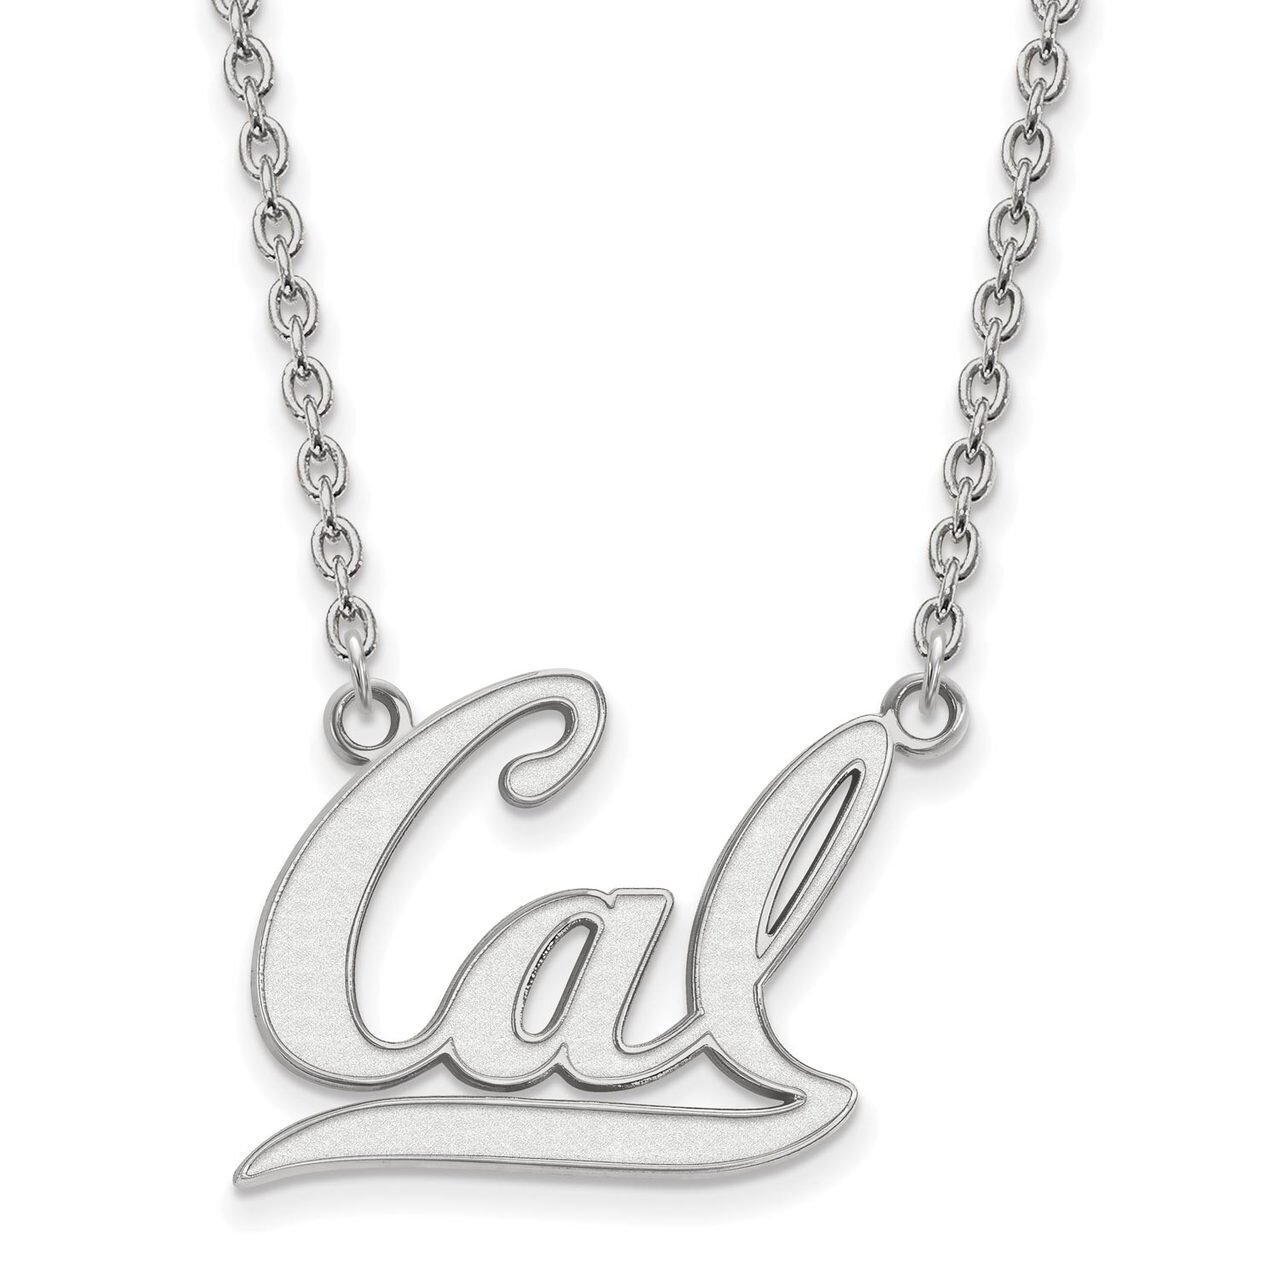 University of California Berkeley Large Pendant with Chain Necklace 10k White Gold 1W012UCB-18